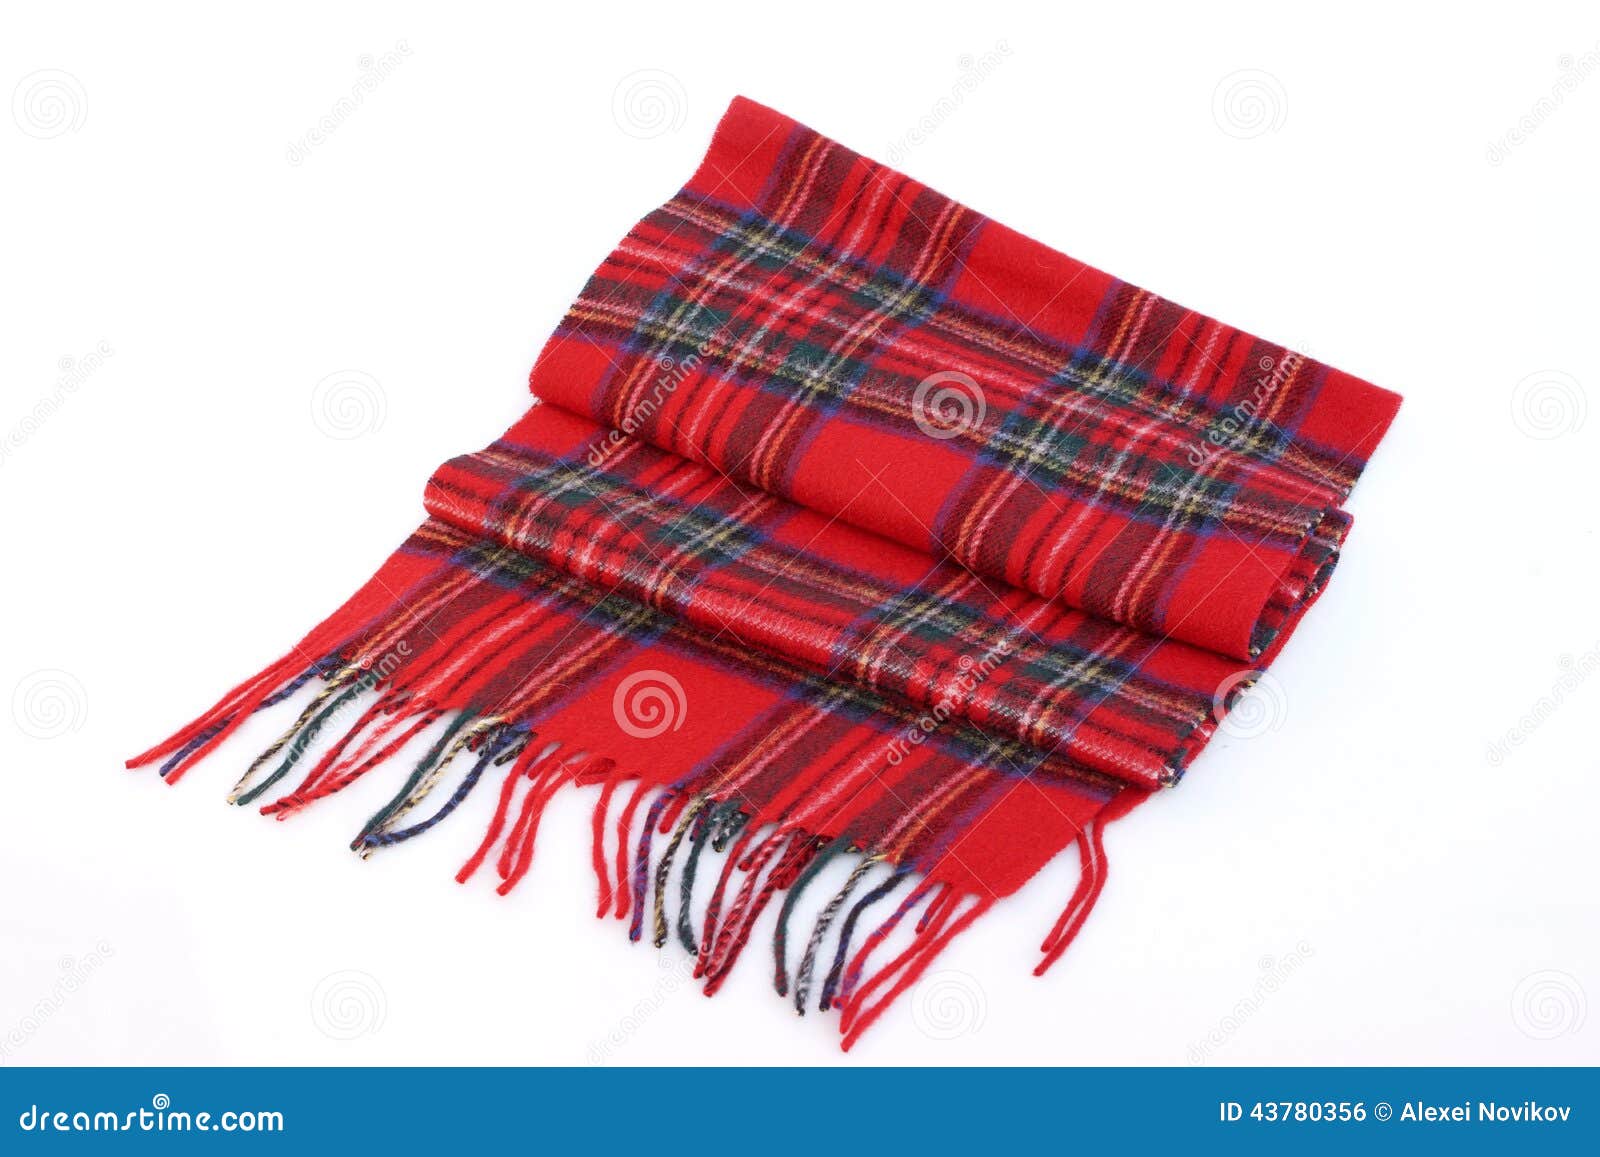 Warm and Soft Red Tartan Scarves Stock Photo - Image of checkered ...